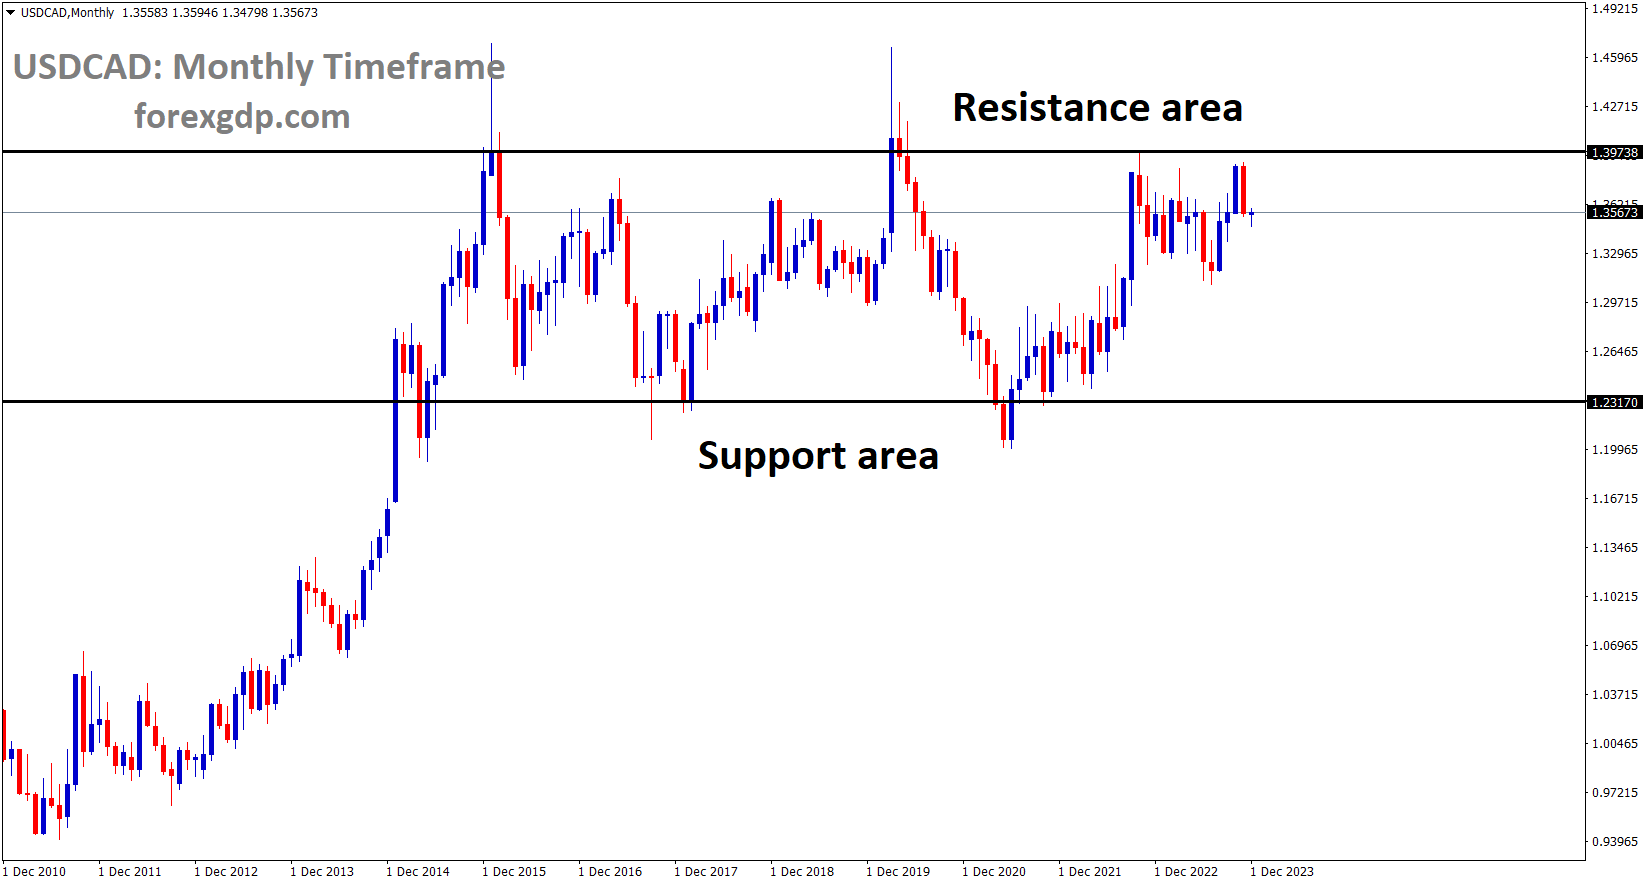 USDCAD is moving in box pattern and market has reached resistance area of the pattern